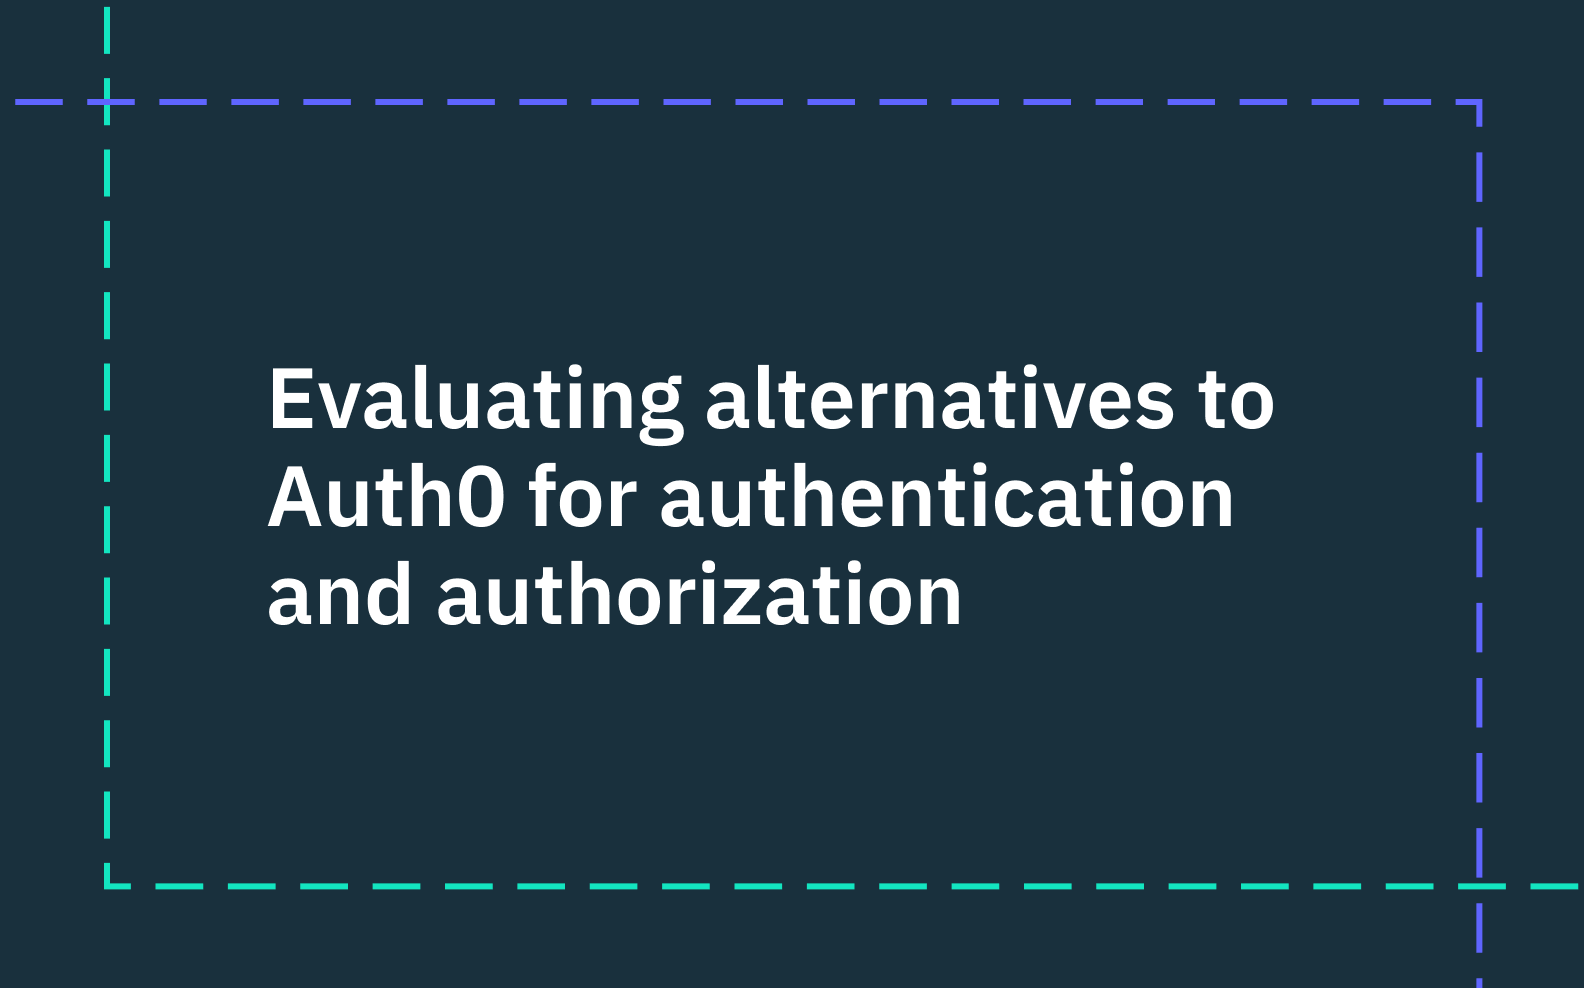 "Evaluating alternatives to Auth0 for authentication and authorization"